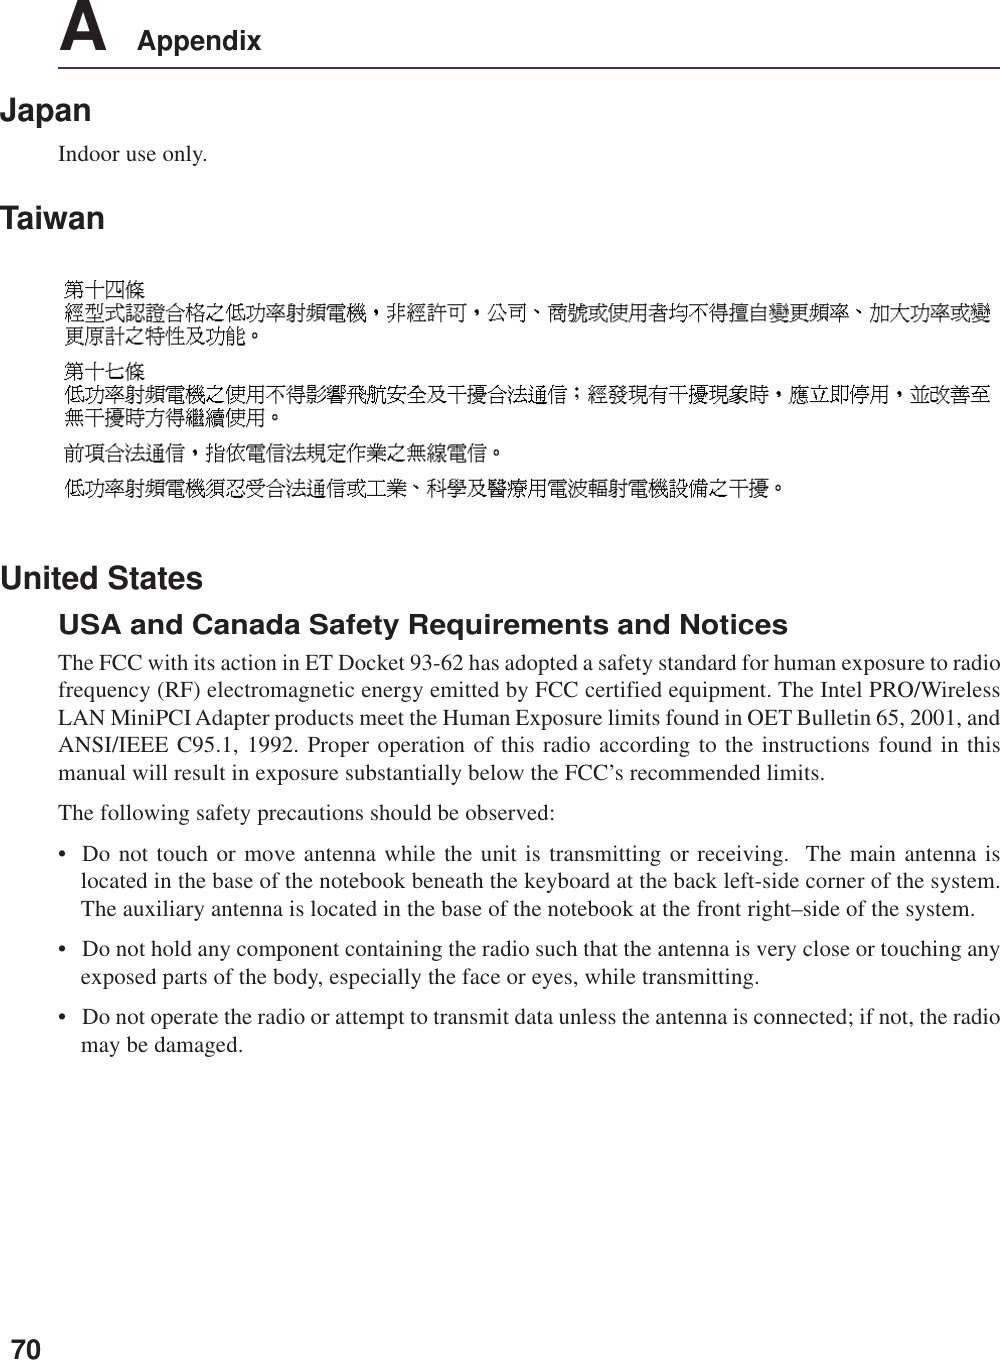 70A    AppendixJapanIndoor use only.TaiwanUnited StatesUSA and Canada Safety Requirements and NoticesThe FCC with its action in ET Docket 93-62 has adopted a safety standard for human exposure to radiofrequency (RF) electromagnetic energy emitted by FCC certified equipment. The Intel PRO/WirelessLAN MiniPCI Adapter products meet the Human Exposure limits found in OET Bulletin 65, 2001, andANSI/IEEE C95.1, 1992. Proper operation of this radio according to the instructions found in thismanual will result in exposure substantially below the FCC’s recommended limits.The following safety precautions should be observed:• Do not touch or move antenna while the unit is transmitting or receiving.  The main antenna islocated in the base of the notebook beneath the keyboard at the back left-side corner of the system.The auxiliary antenna is located in the base of the notebook at the front right–side of the system.• Do not hold any component containing the radio such that the antenna is very close or touching anyexposed parts of the body, especially the face or eyes, while transmitting.• Do not operate the radio or attempt to transmit data unless the antenna is connected; if not, the radiomay be damaged.